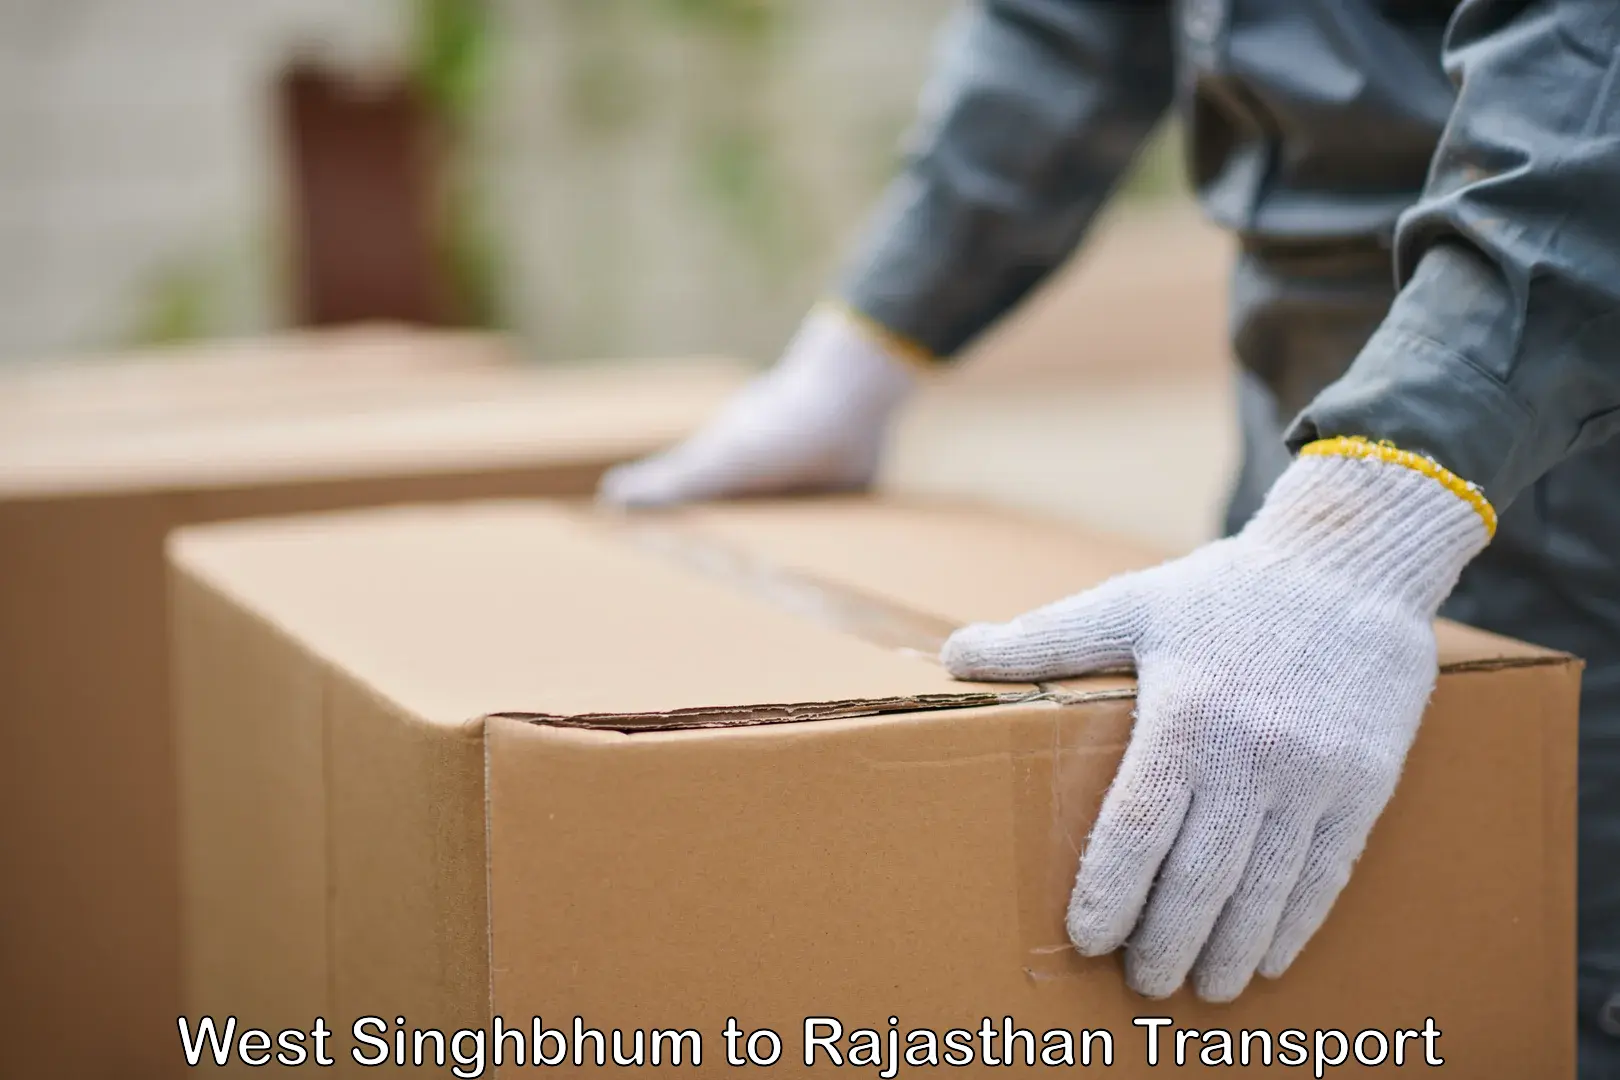 Truck transport companies in India West Singhbhum to Srimadhopur